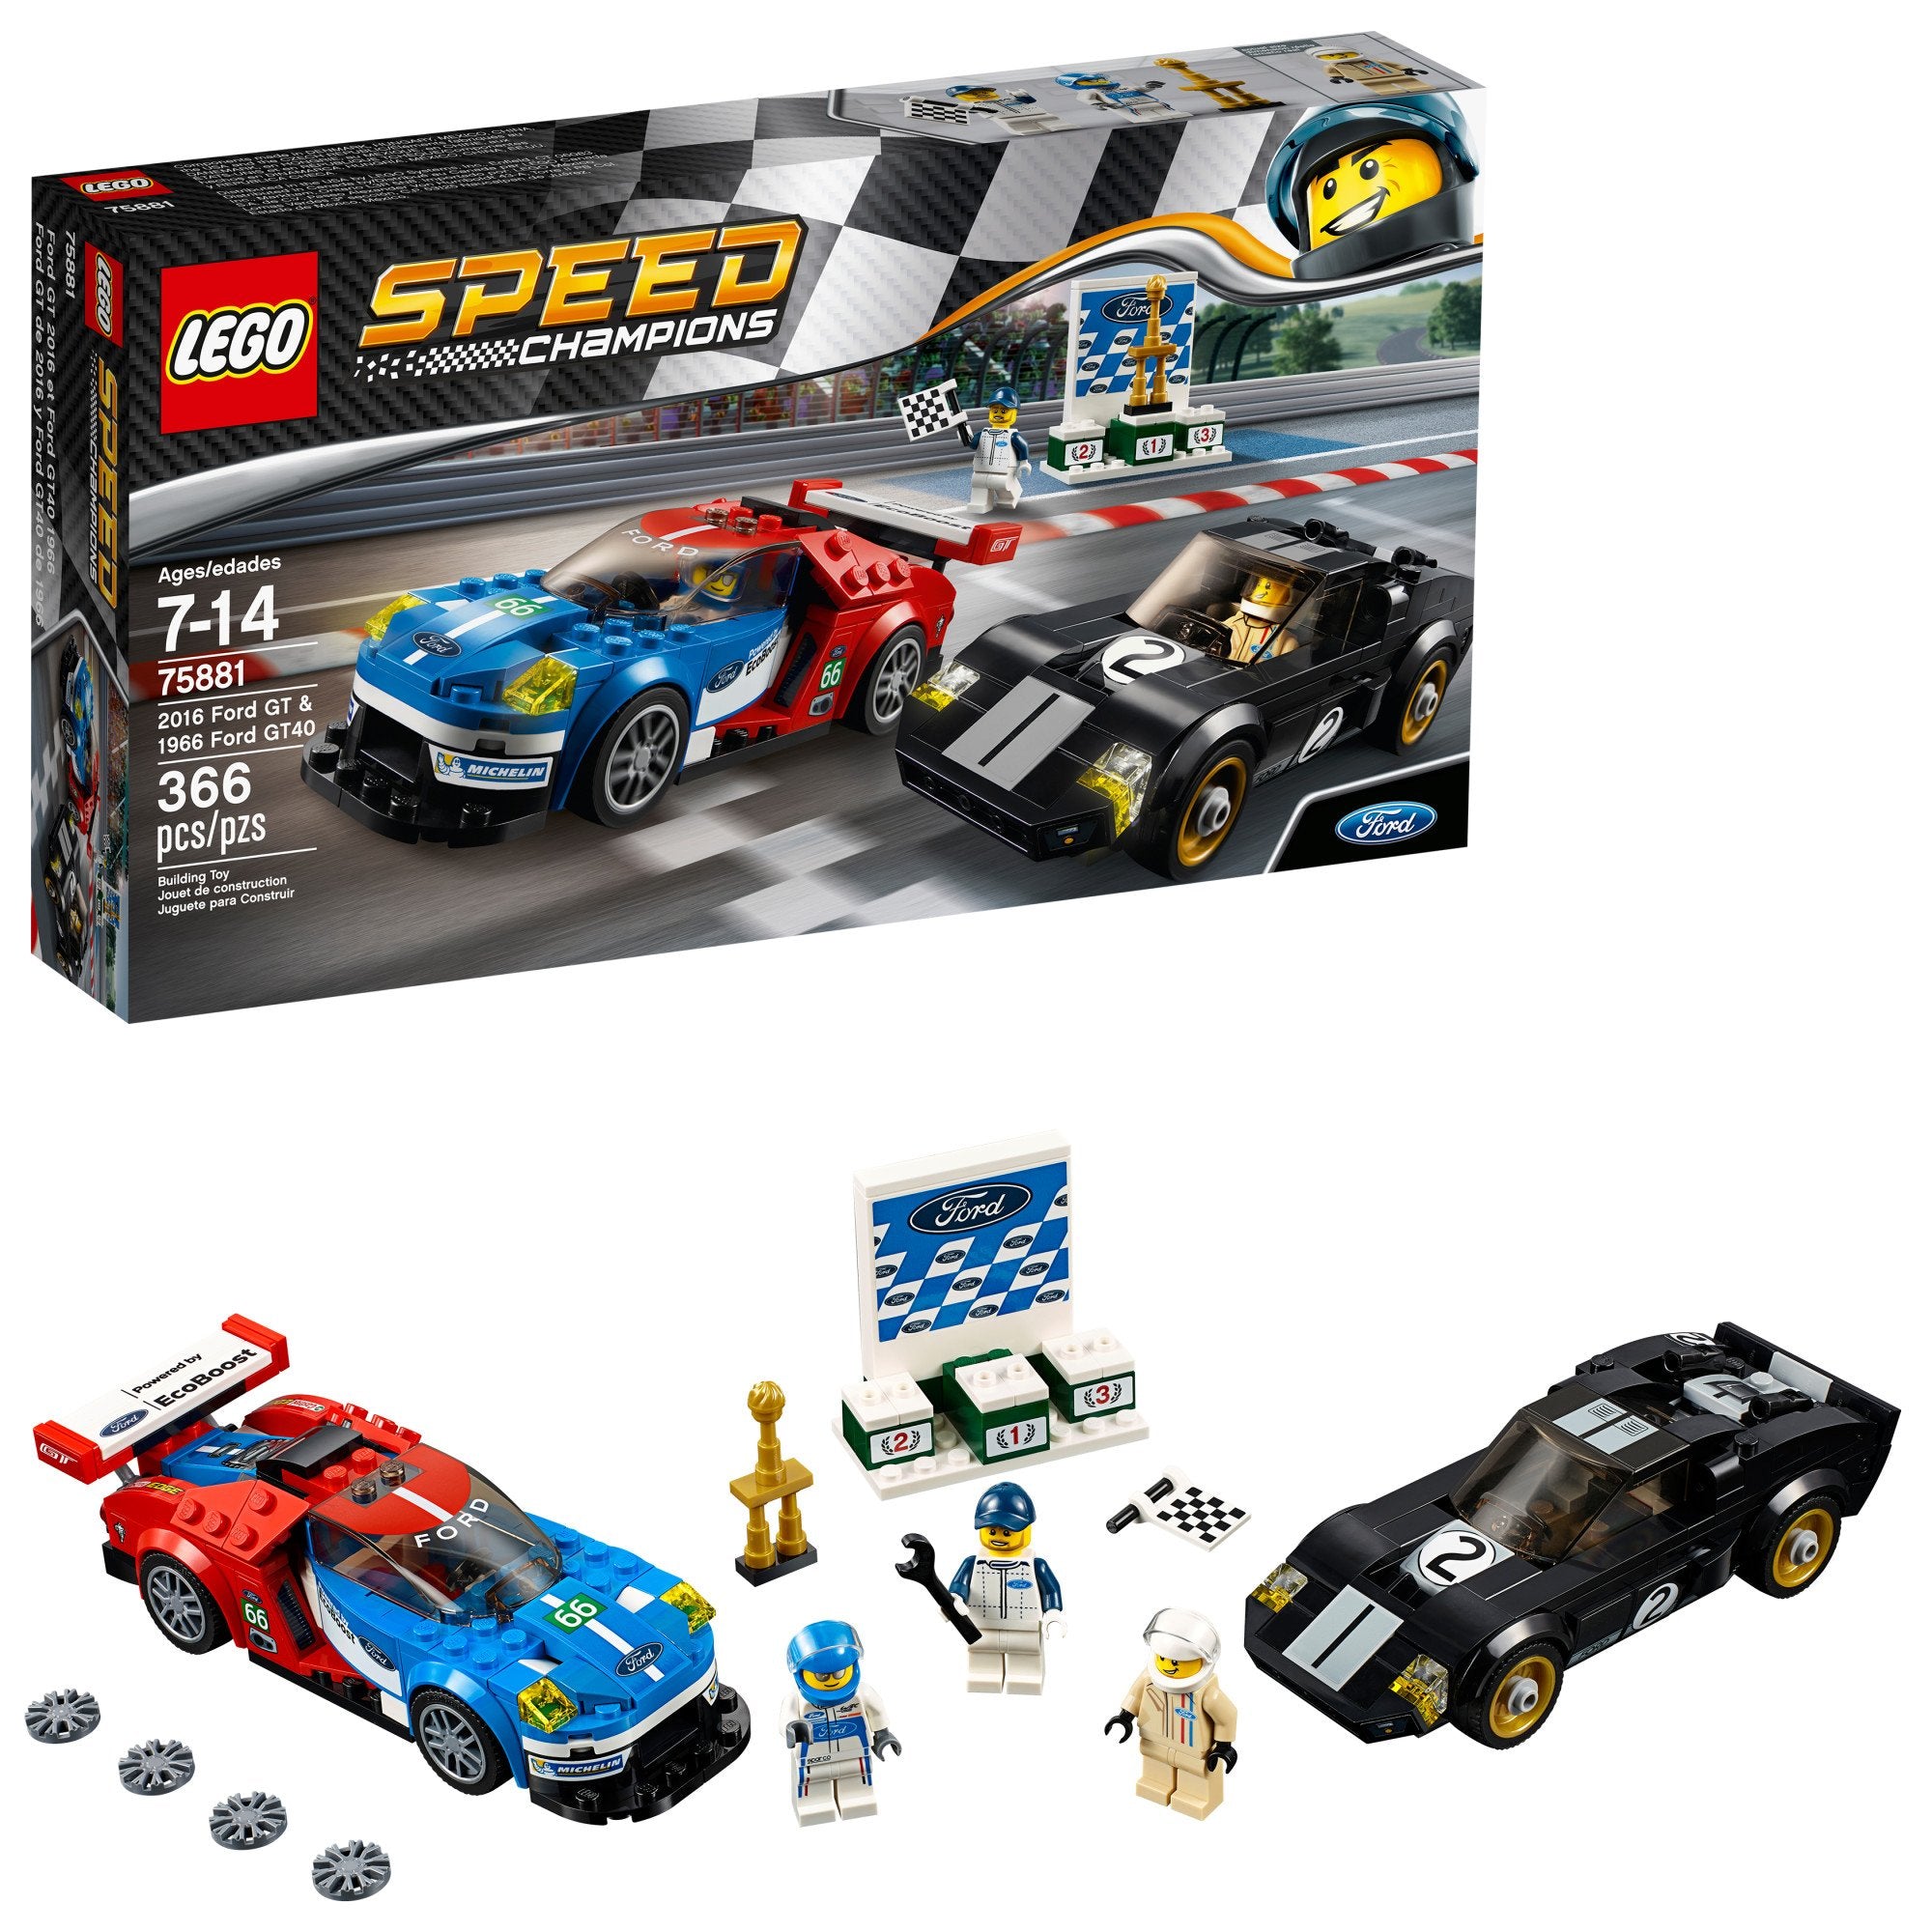 LEGO Speed Champions 6175279 2016 GT & 1966 Ford Gt40 75881 Building Kit (366 Piece)